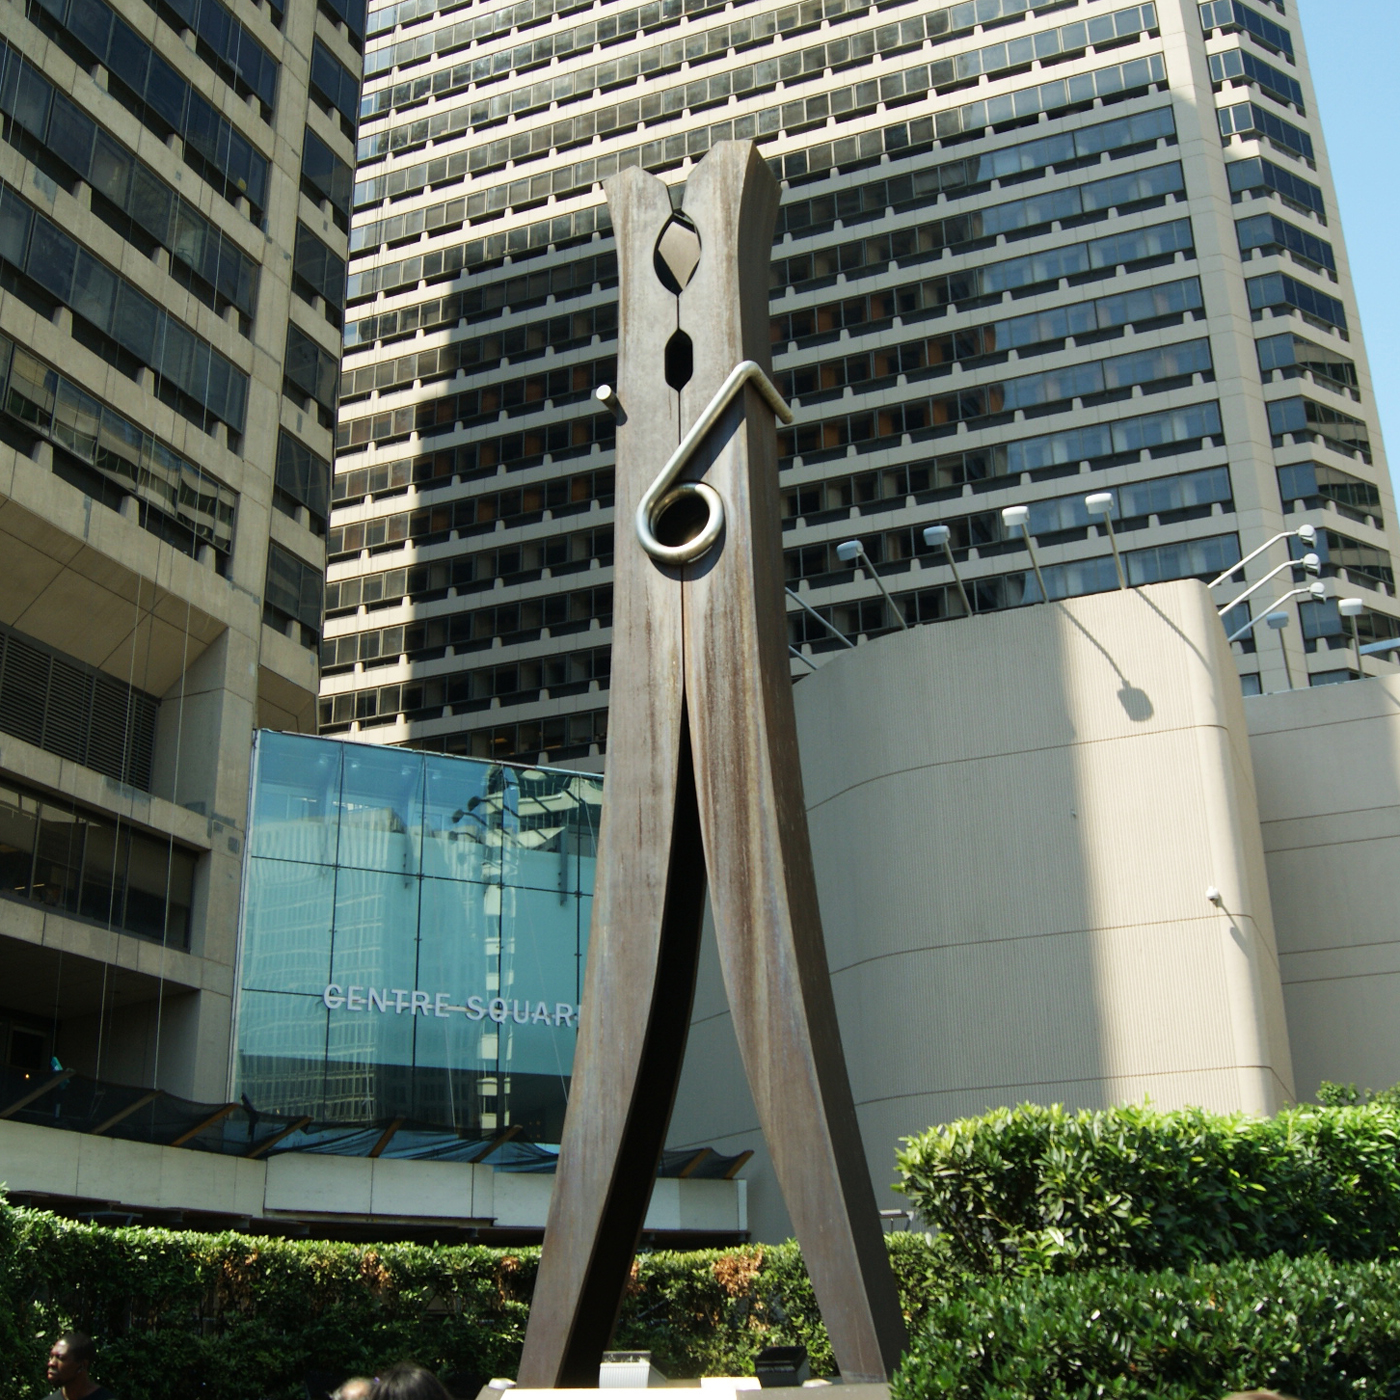 Claes Oldenburg, the artist of the Clothespin